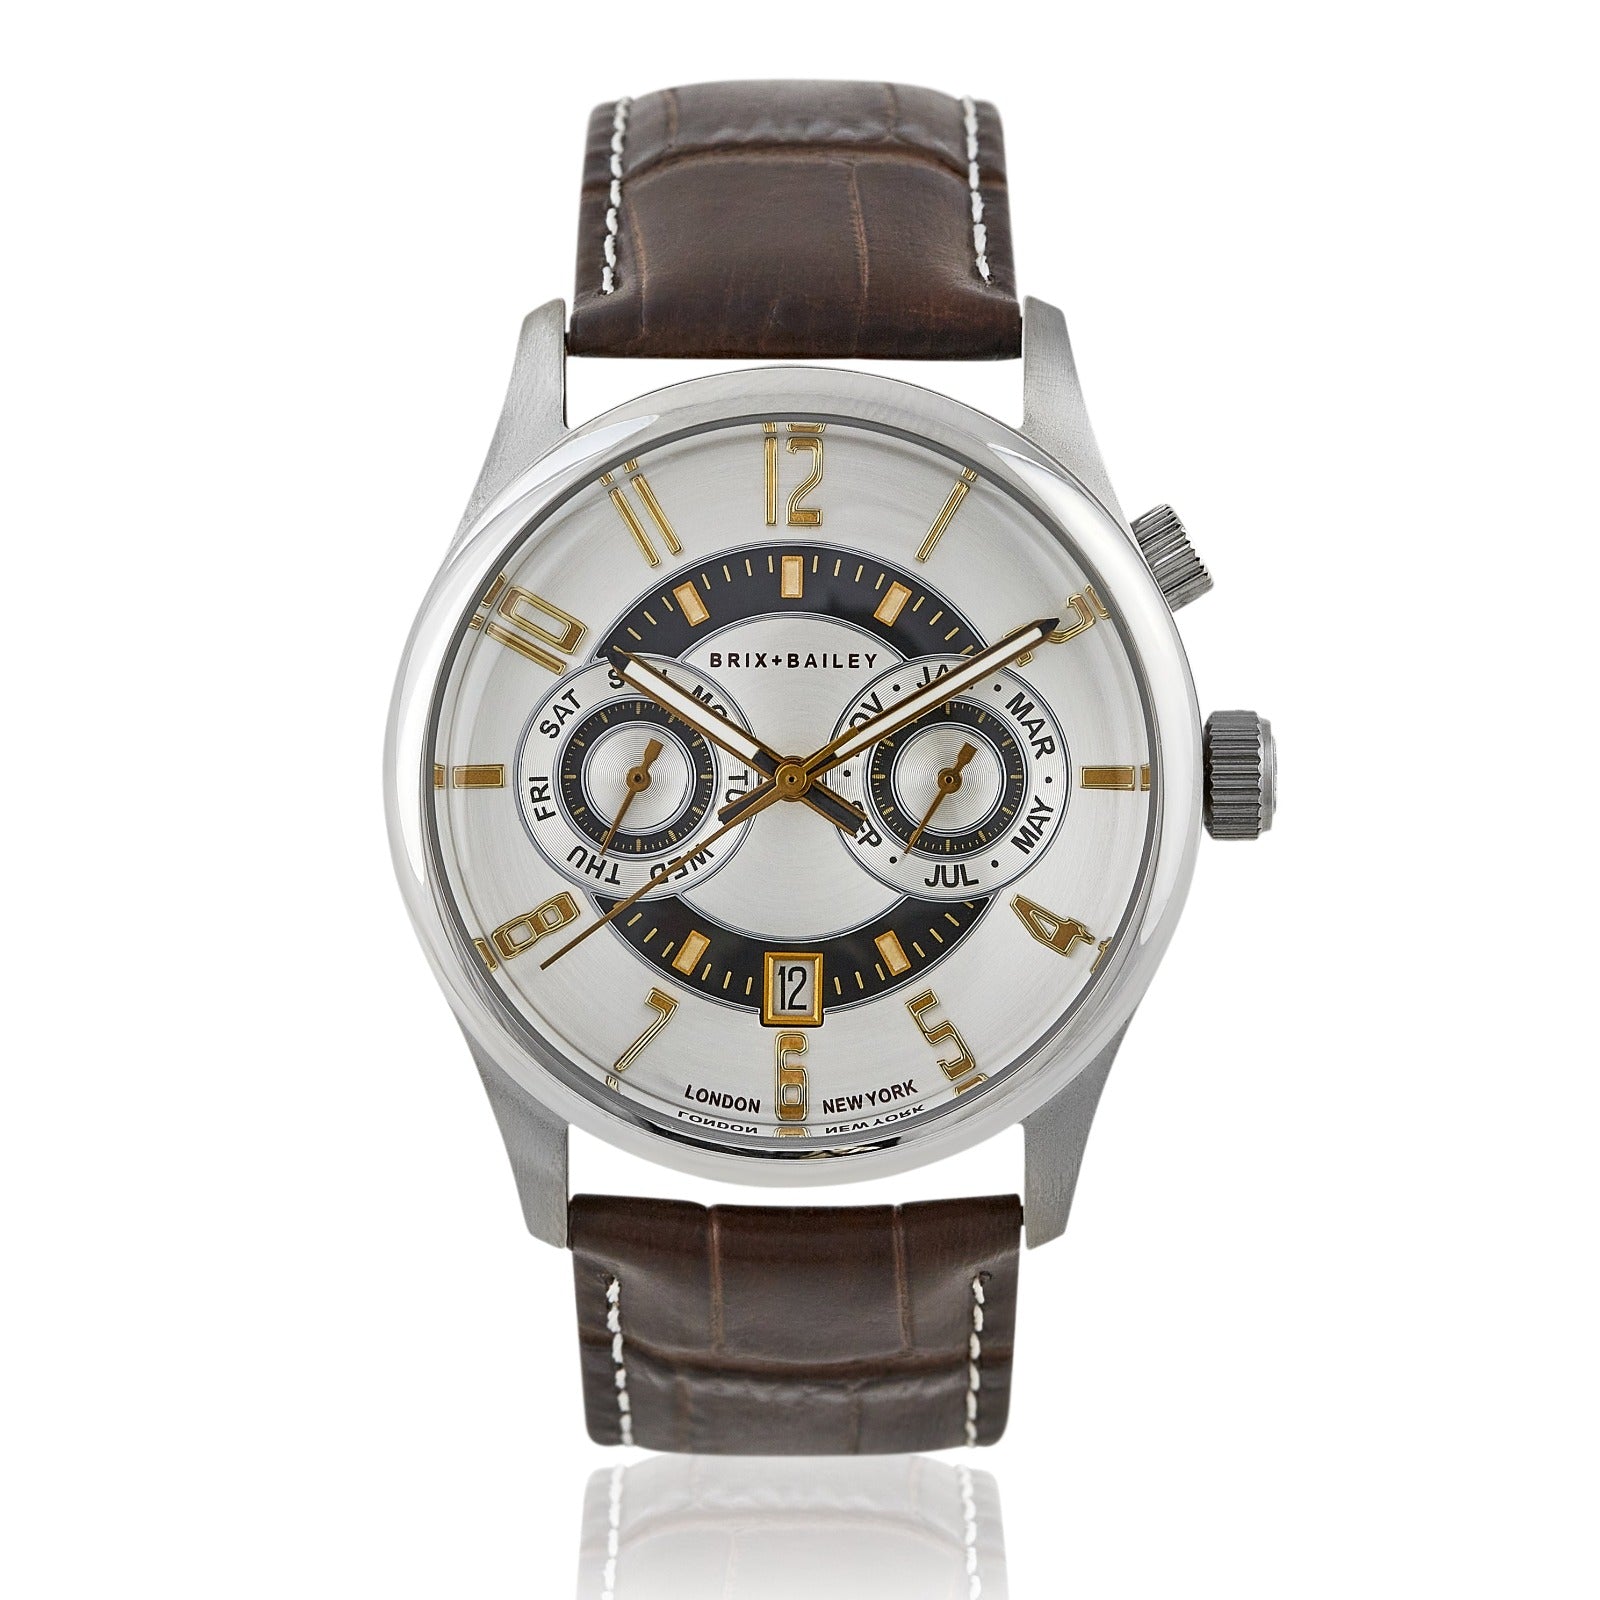 The Brix + Bailey Heyes Chronograph Automatic Watch Form 6